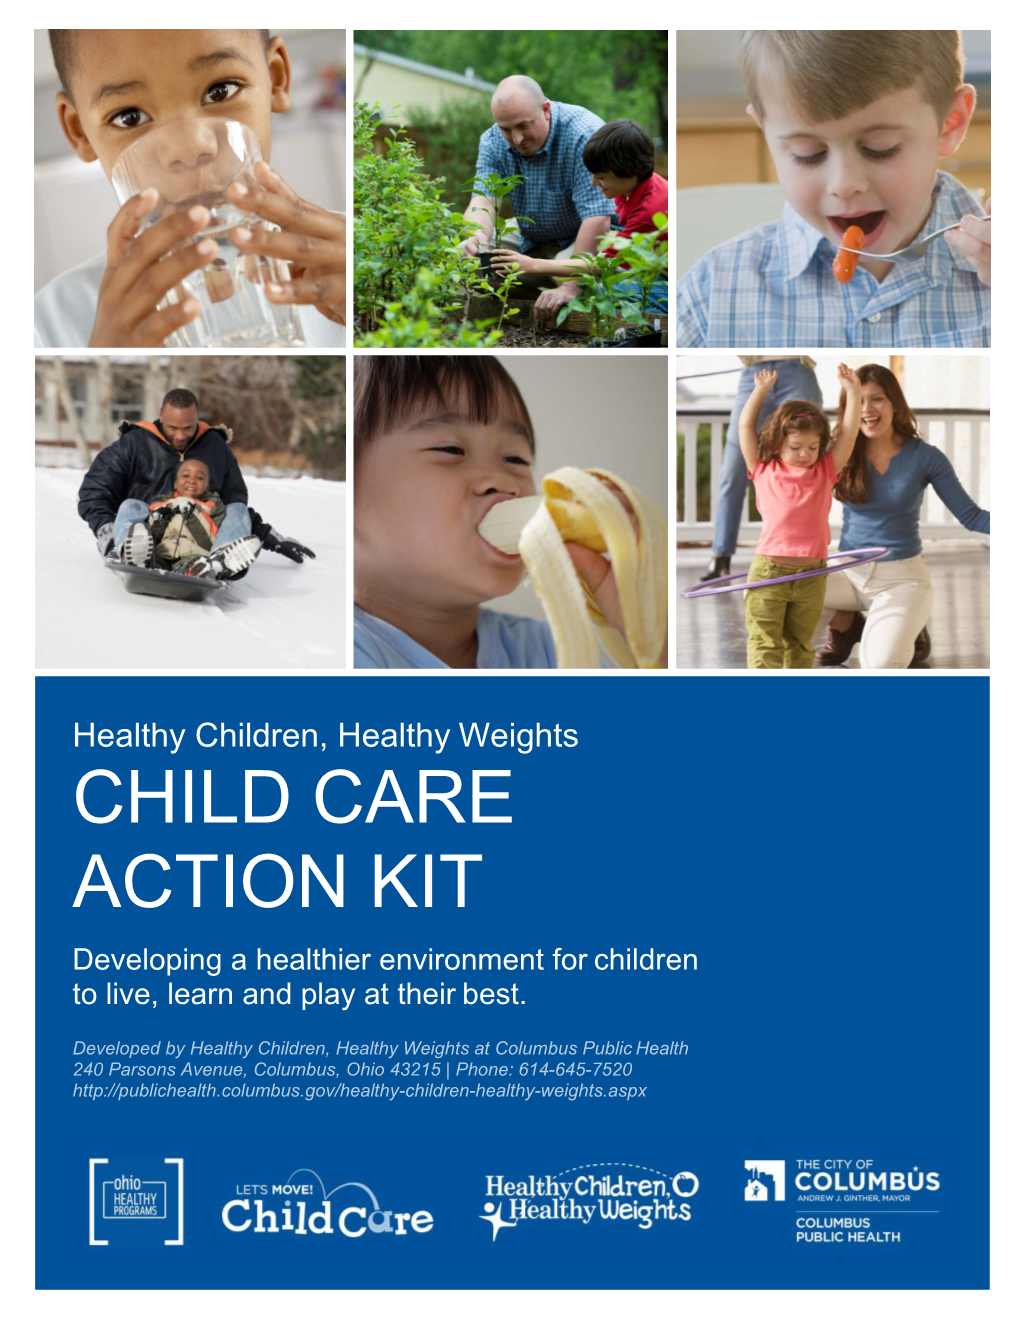 CHILD CARE ACTION KIT Developing a Healthier Environment for Children to Live, Learn and Play at Their Best